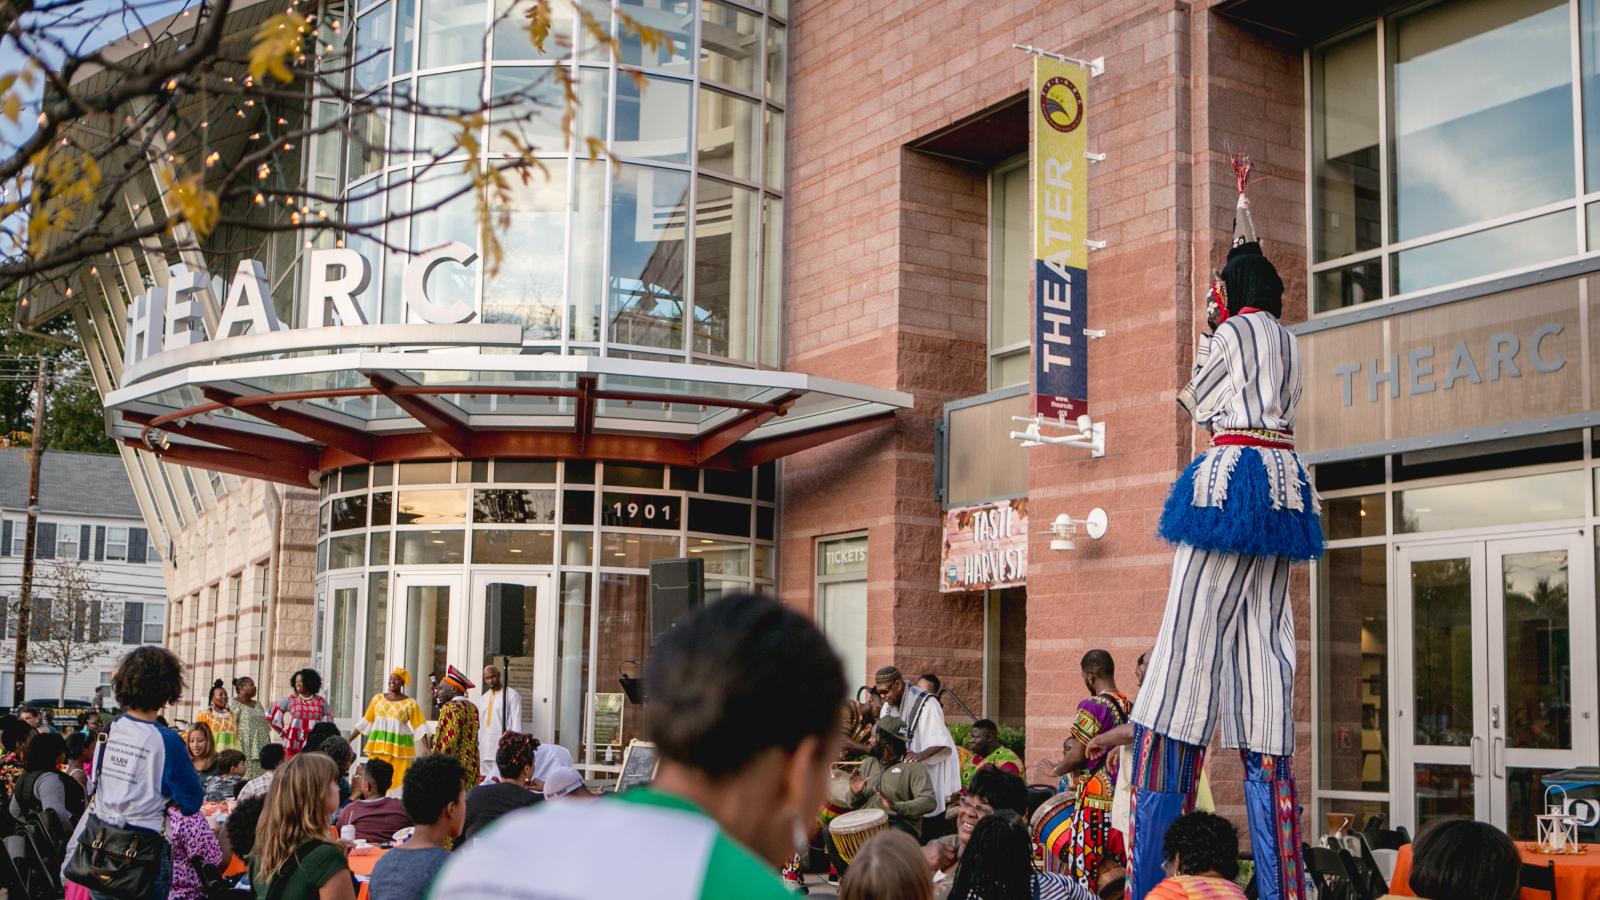 A crowd outside a glass-fronted building, and a person on stilts walking through the crowd. 